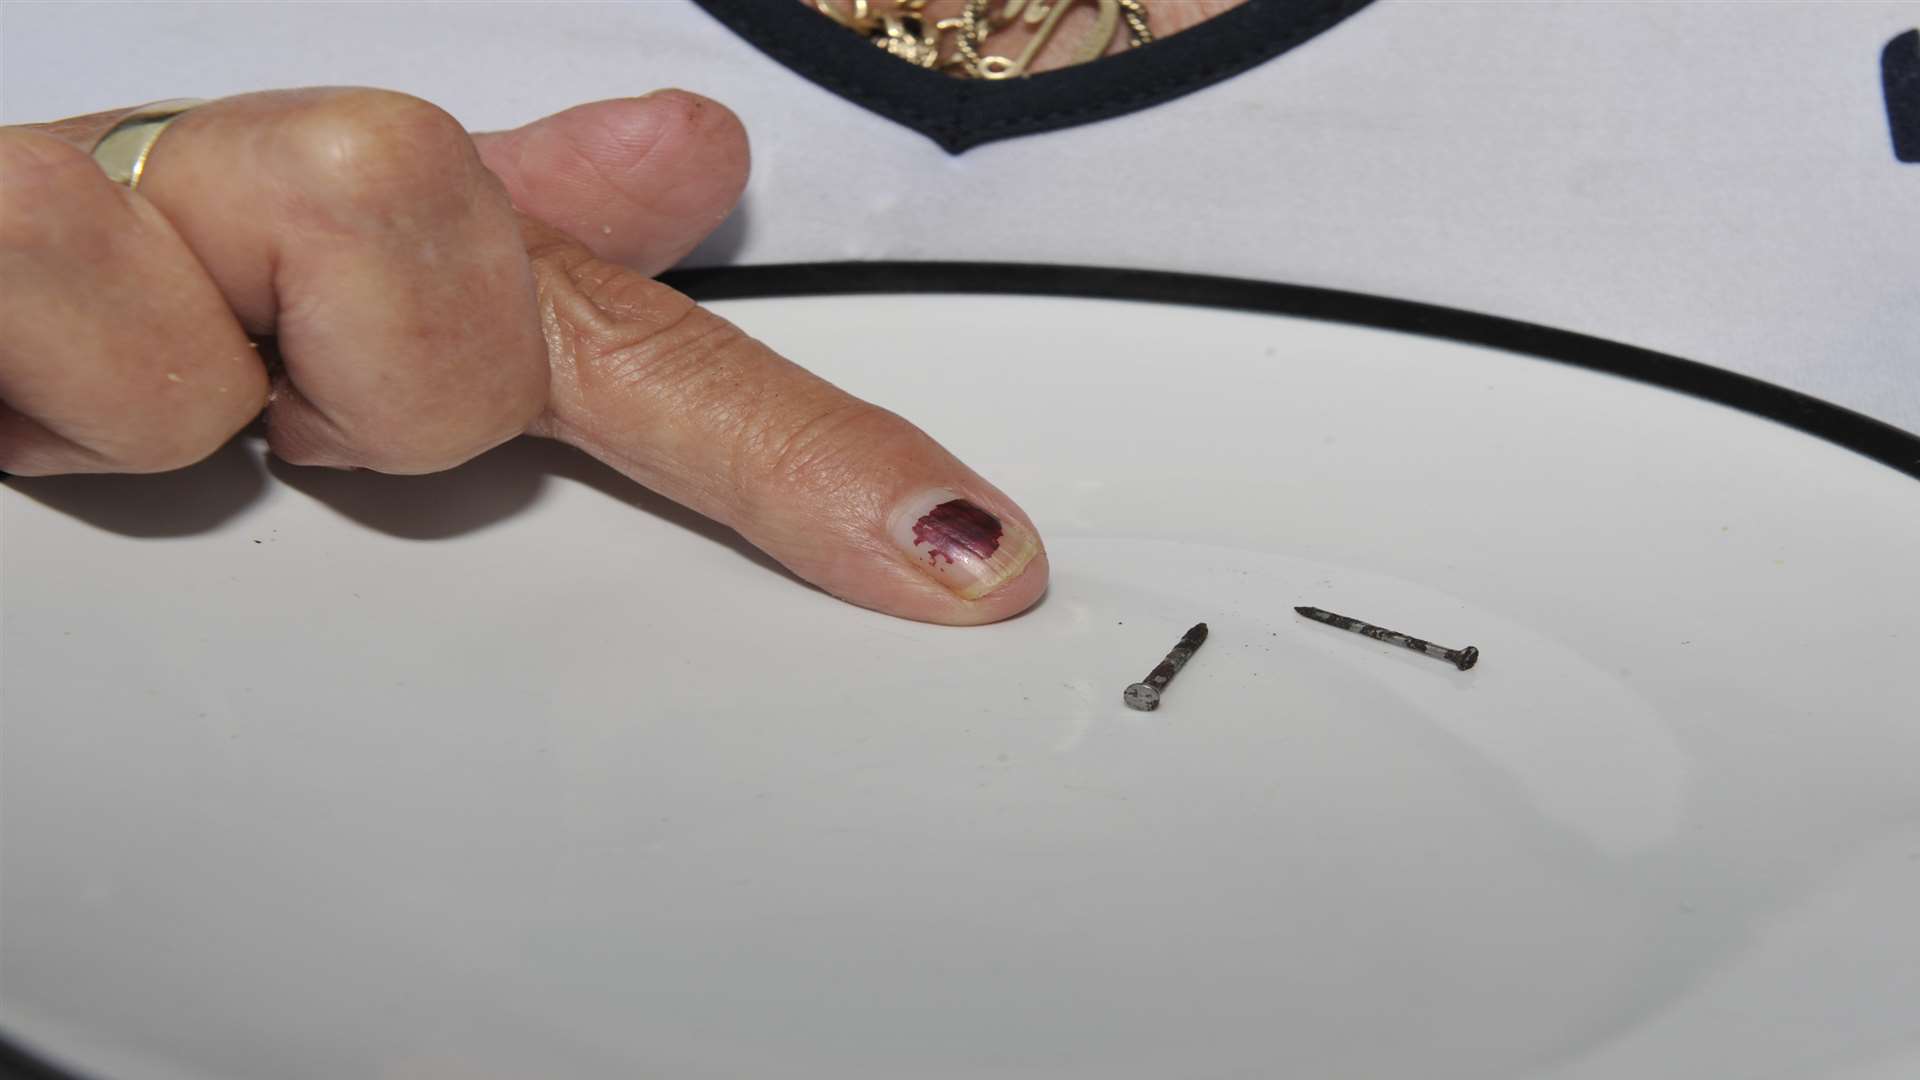 Mrs Kitchen's daughter was worried the nails could have harmed her son. Picture: Tony Flashman